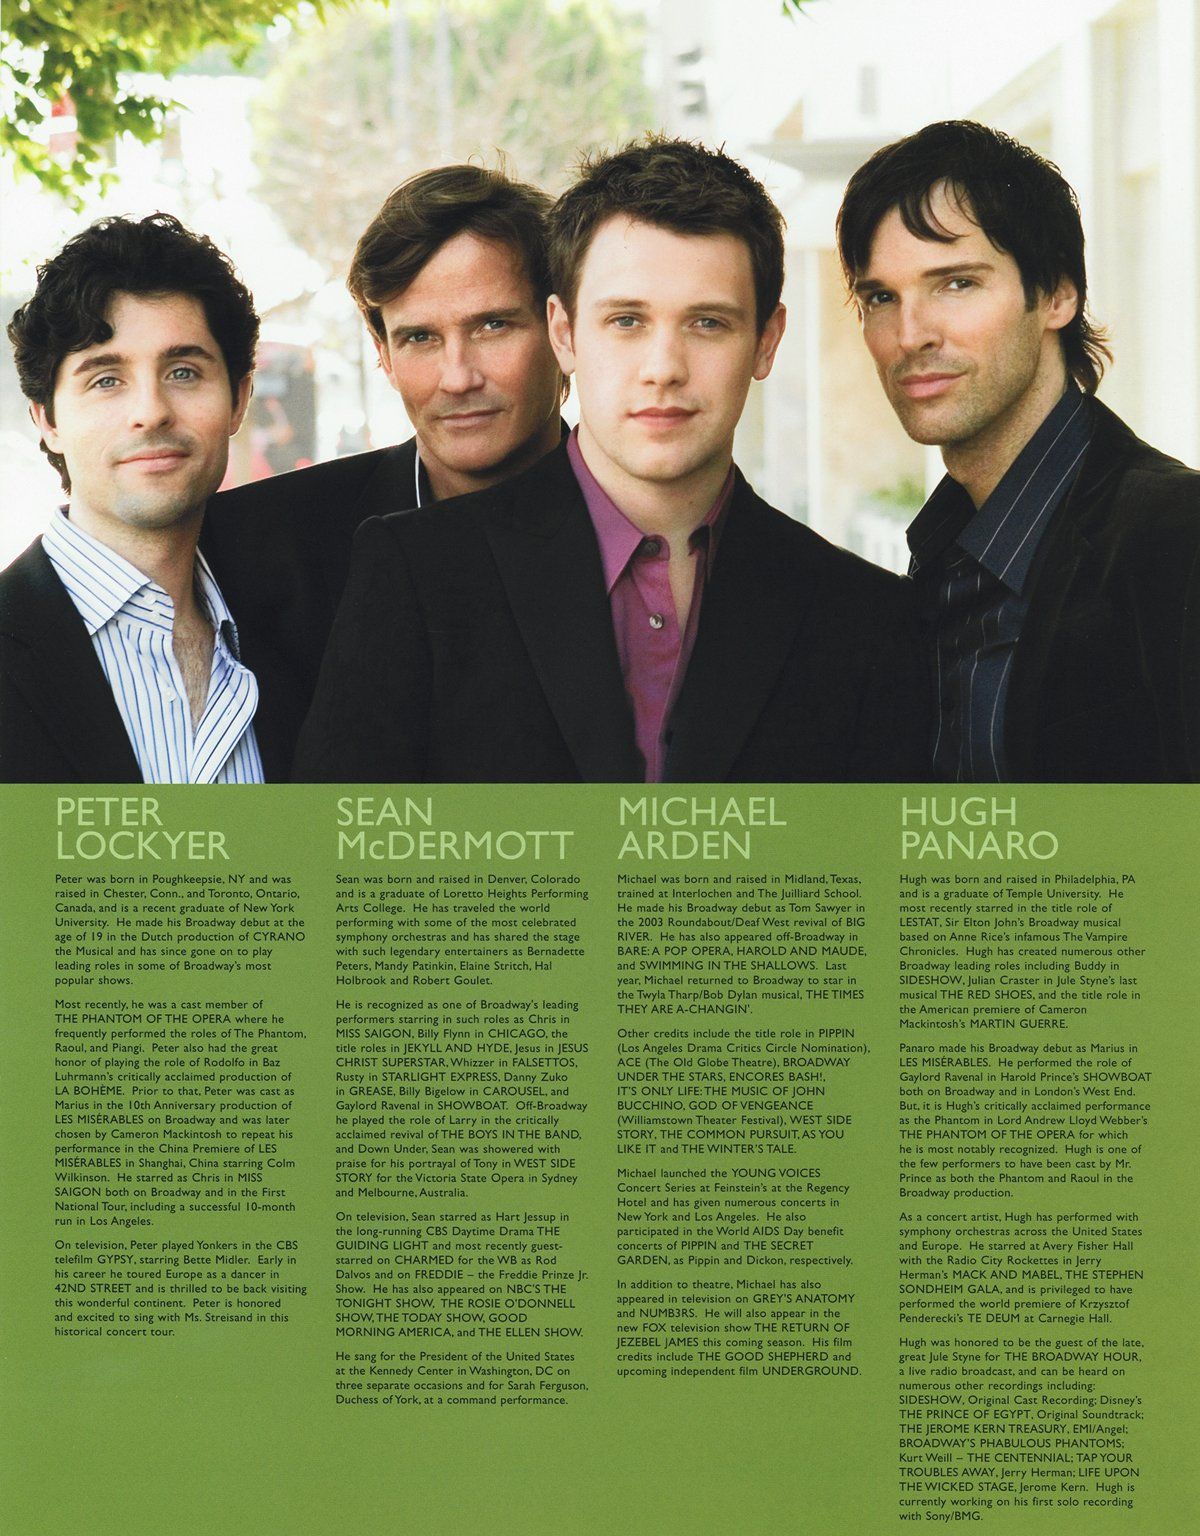 The Broadway Boys on Streisand's 2007 Europe concert tour, as they appear in the official concert program.